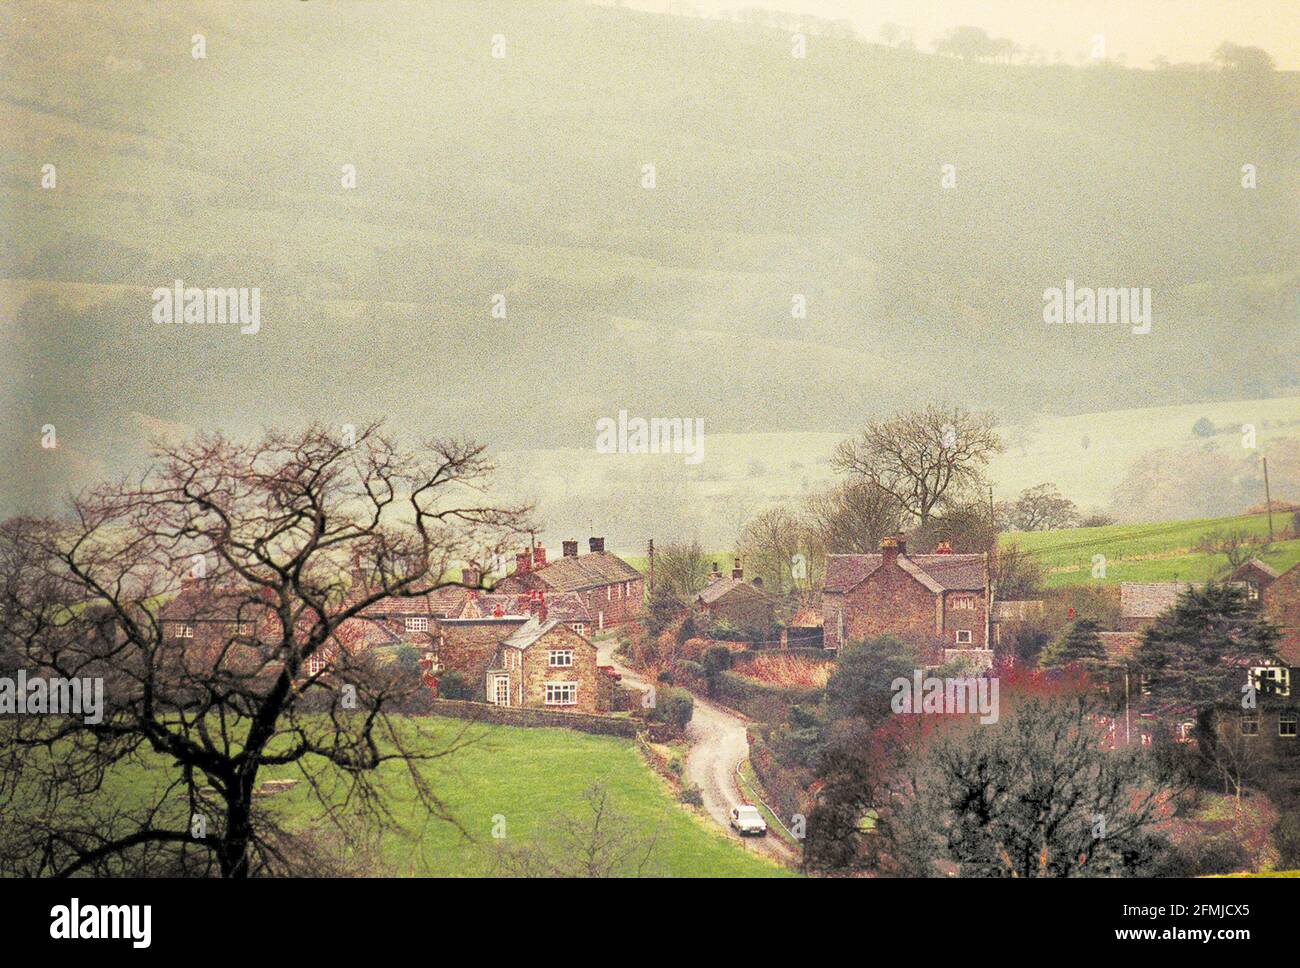 THE RURAL IDYLL ON THE EDGE OF THE PEAK DISTRICT JAN 1998 A COMUTER LEAVES THE VILLAGE OF HEATON NEAR RUSHTON SPENCER, NORTH OF LEEK. Stock Photo